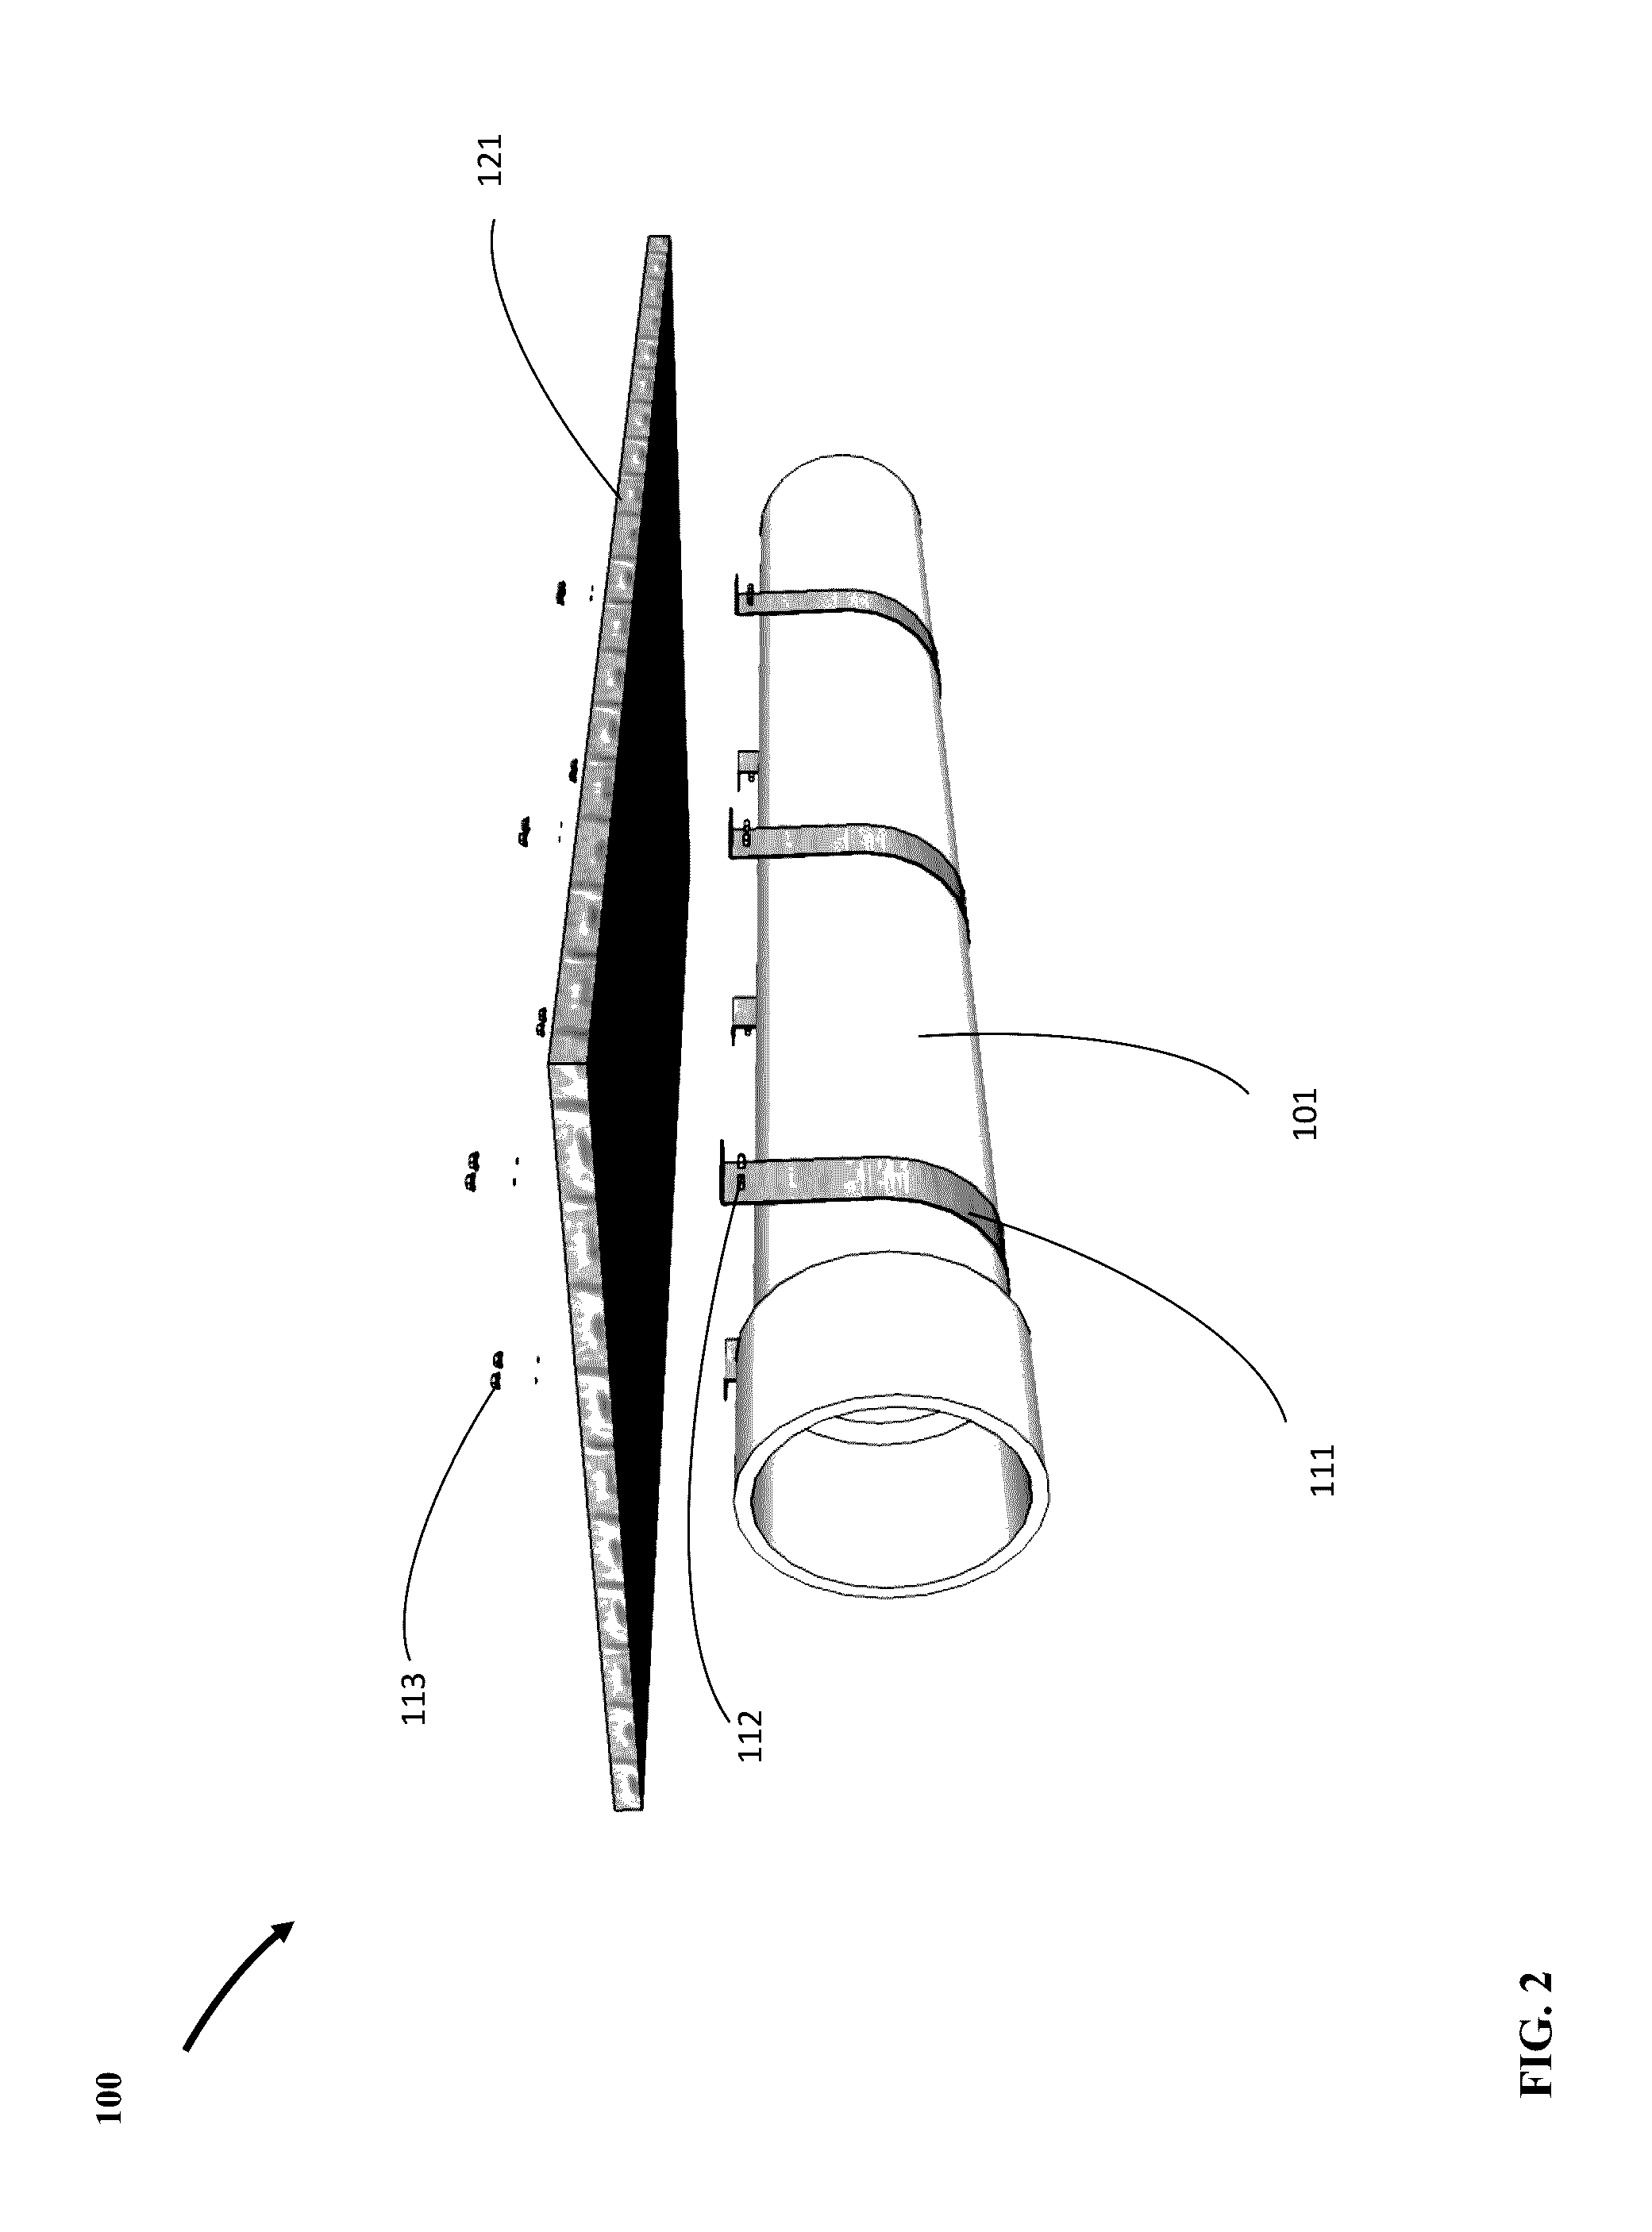 Apparatus and Method for Installing Utility Service Lines in Road Pavements